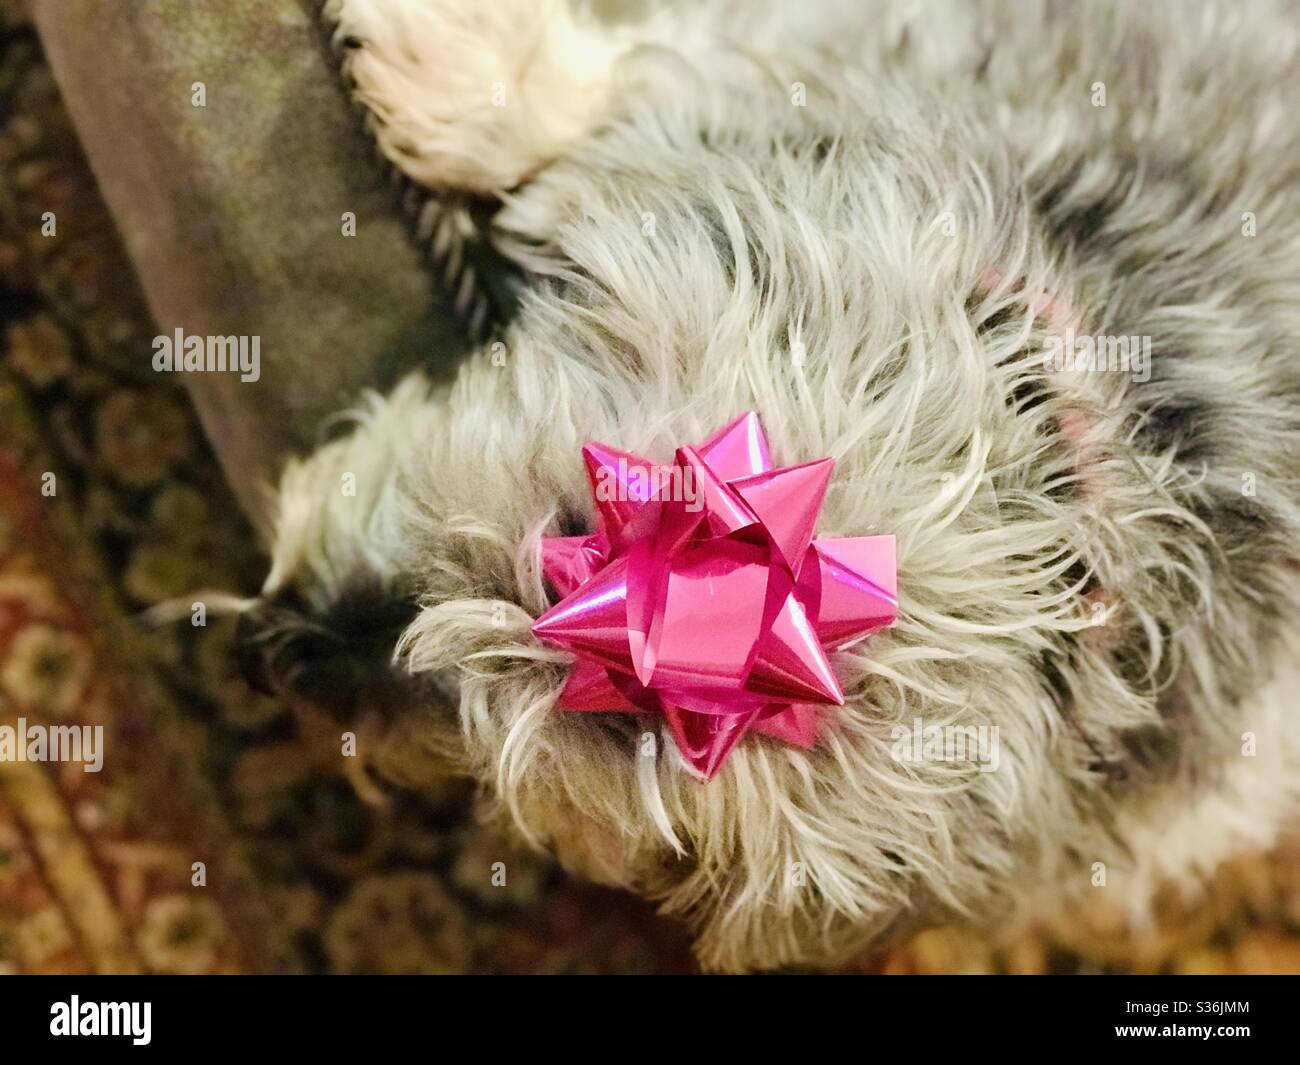 A pink bow placed on the head of a small grey dog. Stock Photo